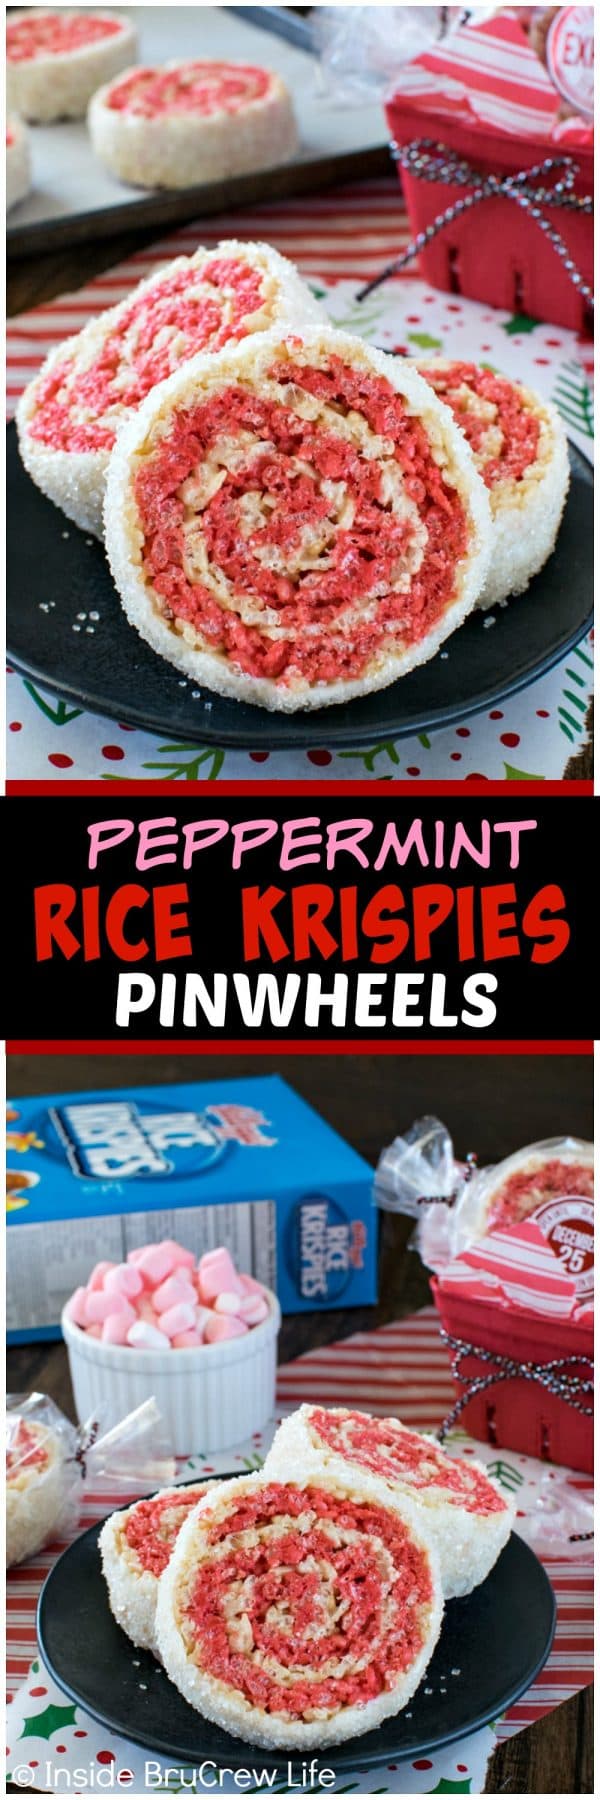 Peppermint Rice Krispies Pinwheels - these easy no bake treats have swirls of red and white and have a white chocolate sugar coating. Great recipe for holiday parties! This was created in partnership with Rice Krispies. #ad